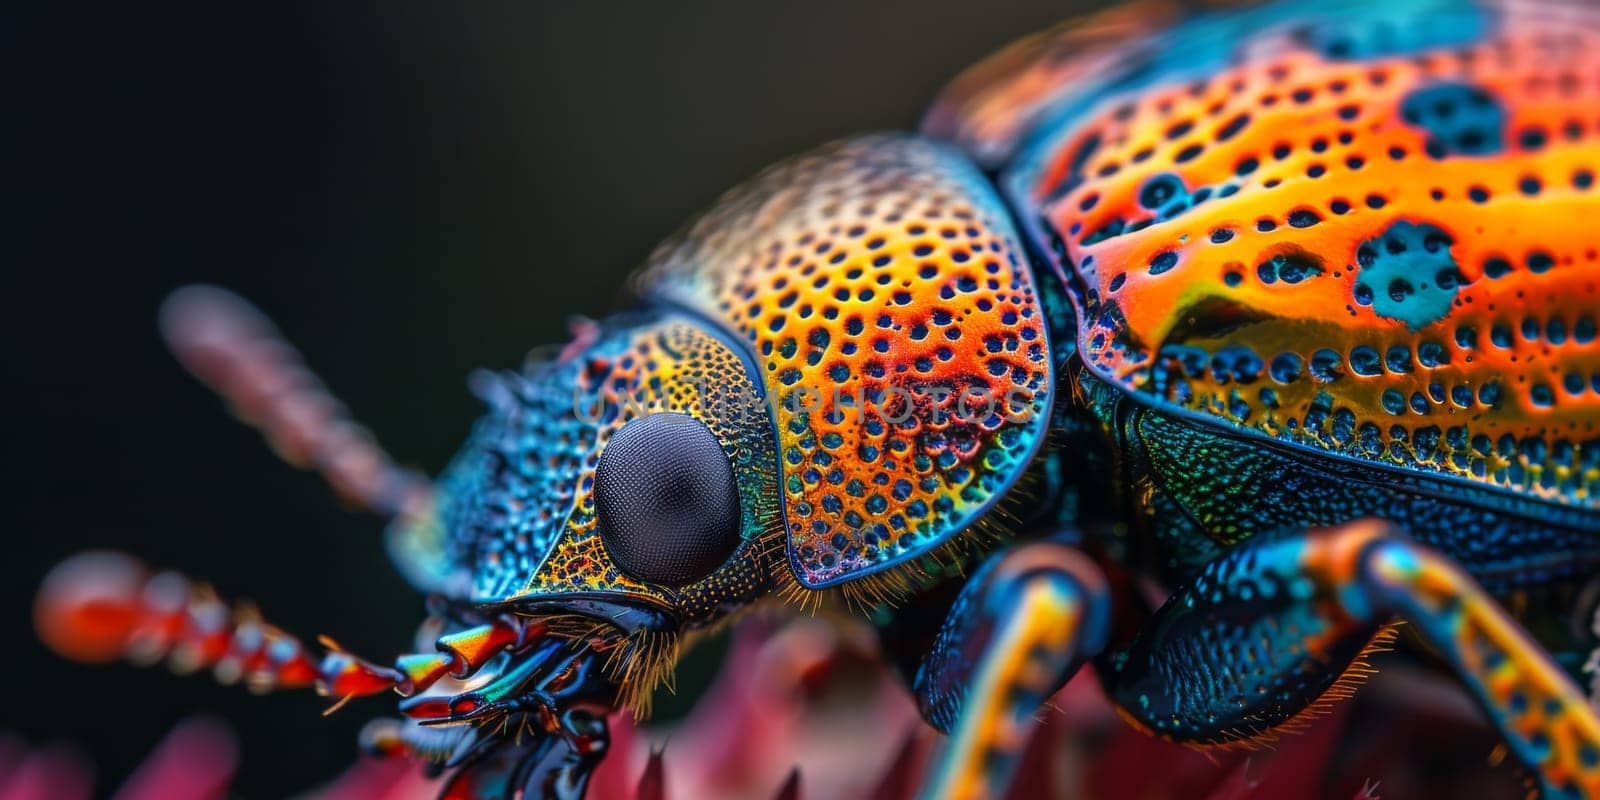 Highlight the dazzling array of colors and patterns found on the back of a beetle by Kadula